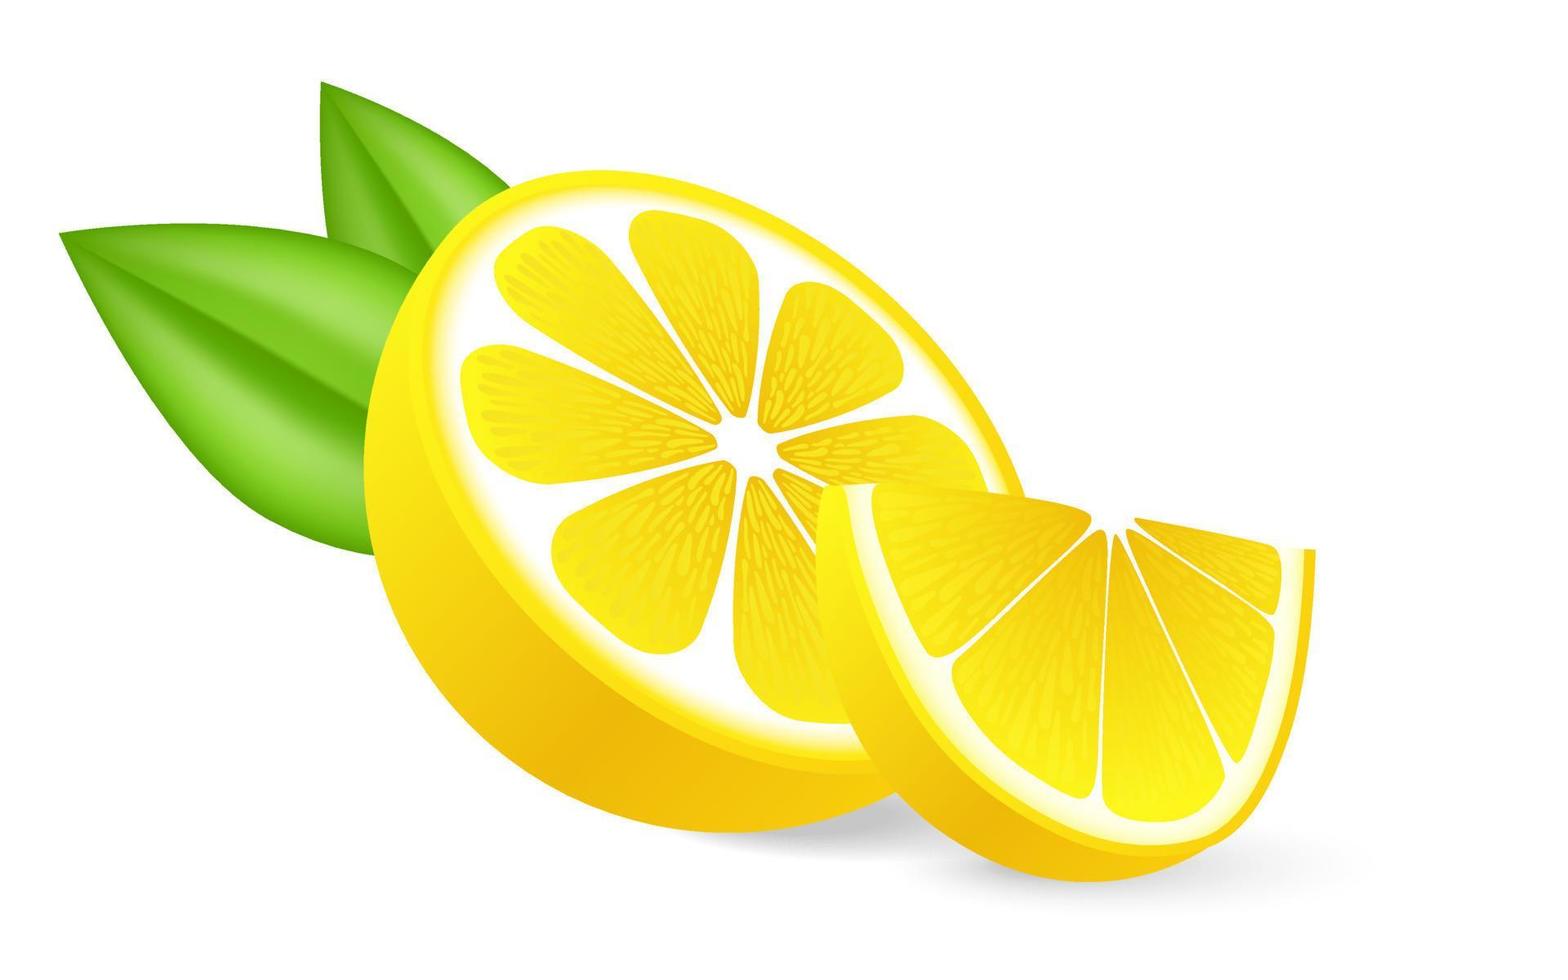 Realistic lemon sliced with green leaf, sour fresh fruit, bright yellow zest, lemon sour fruit vector illustration isolated on white background for cosmetics and food packaging design farmer's market.